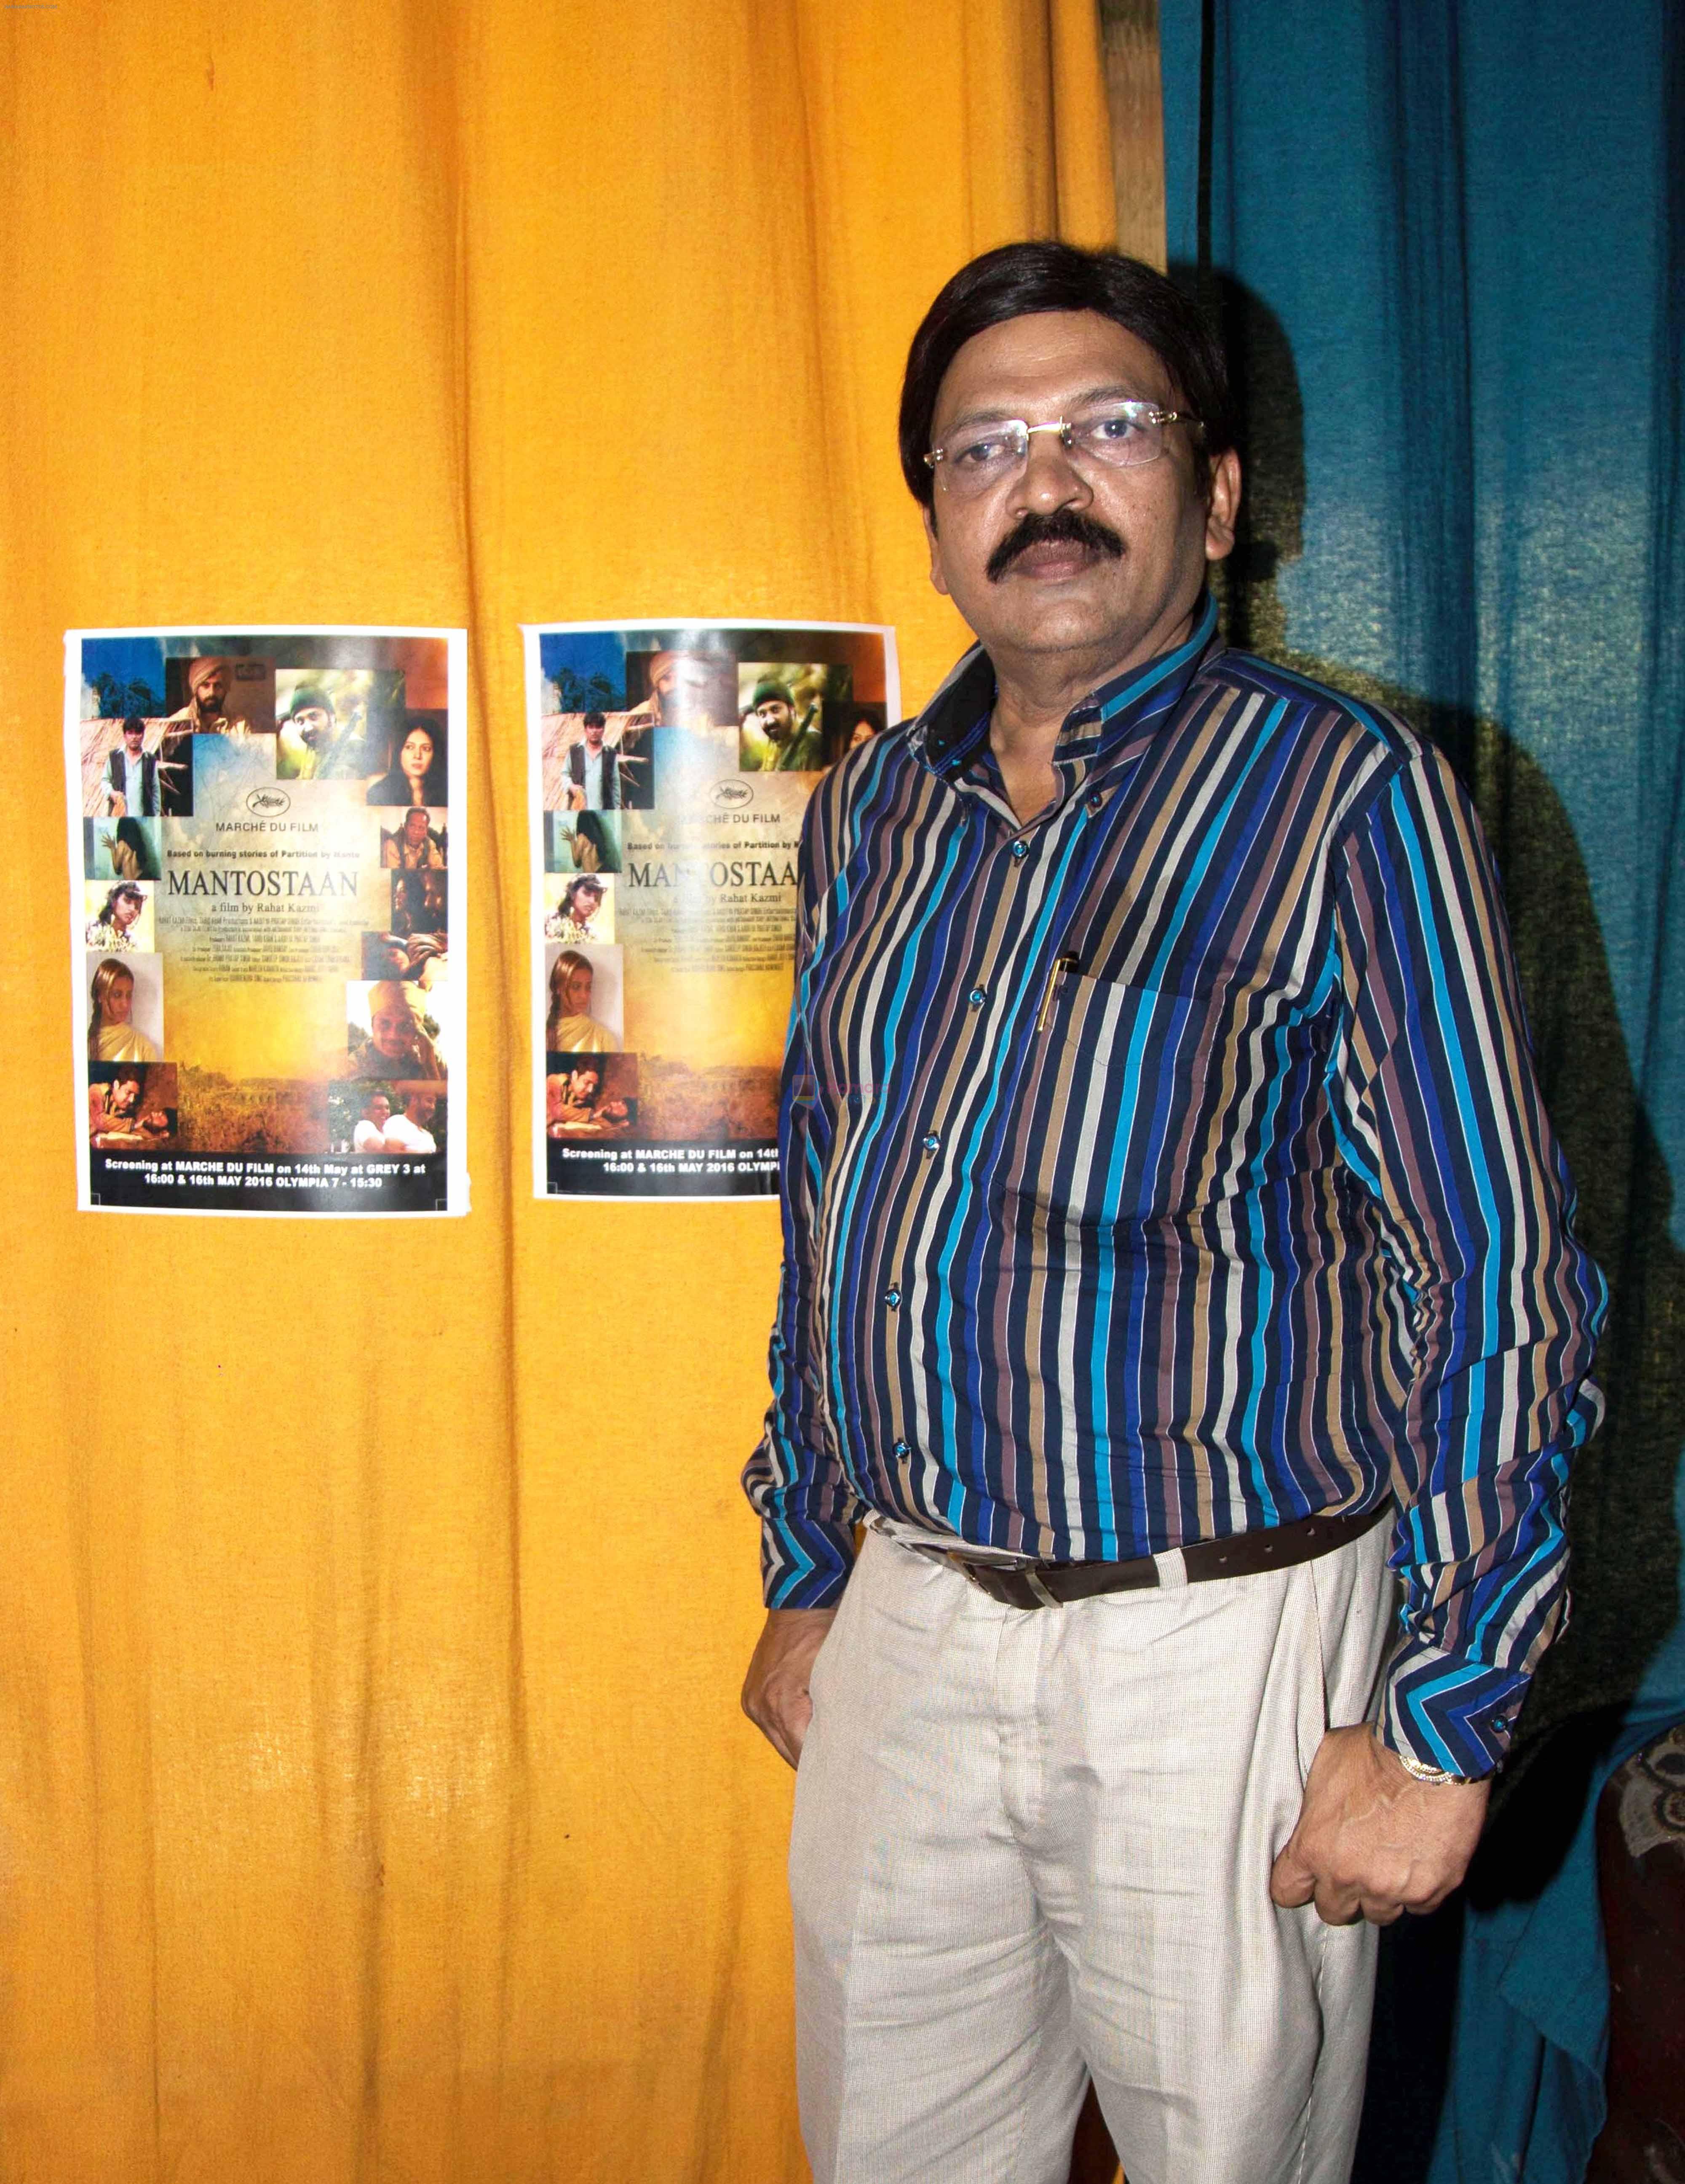 Creative Producer Bhanu Pratap Singh at a celebration of his film Mantostaan which received a standing ovation at Cannes